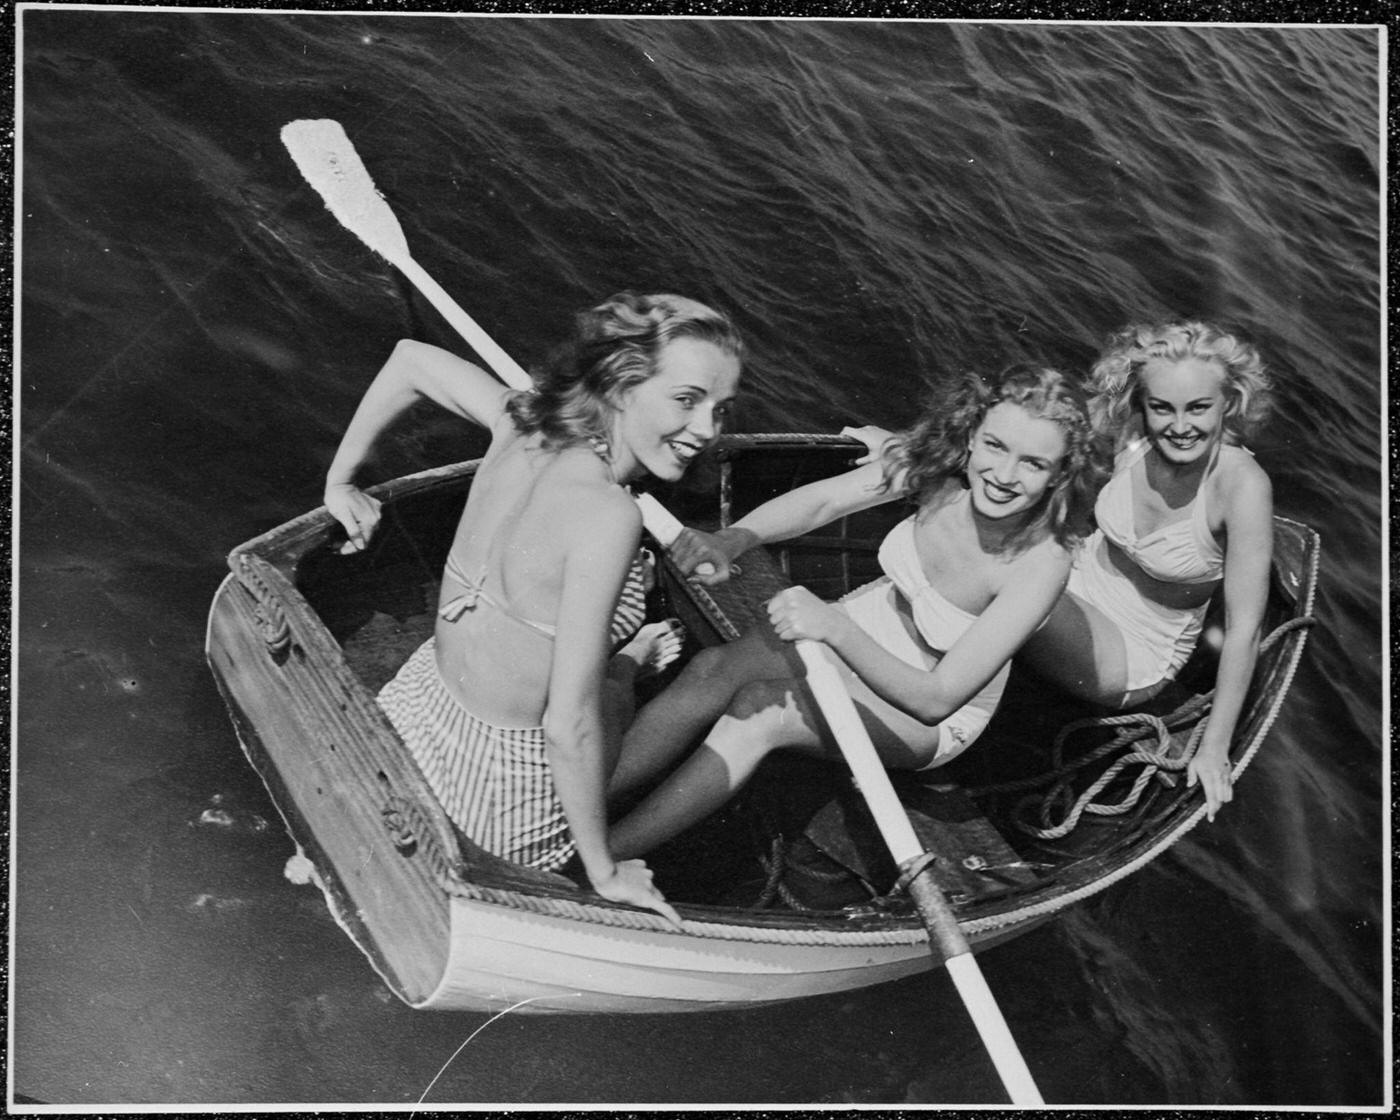 Marilyn Monroe out rowing with friends, 1941.